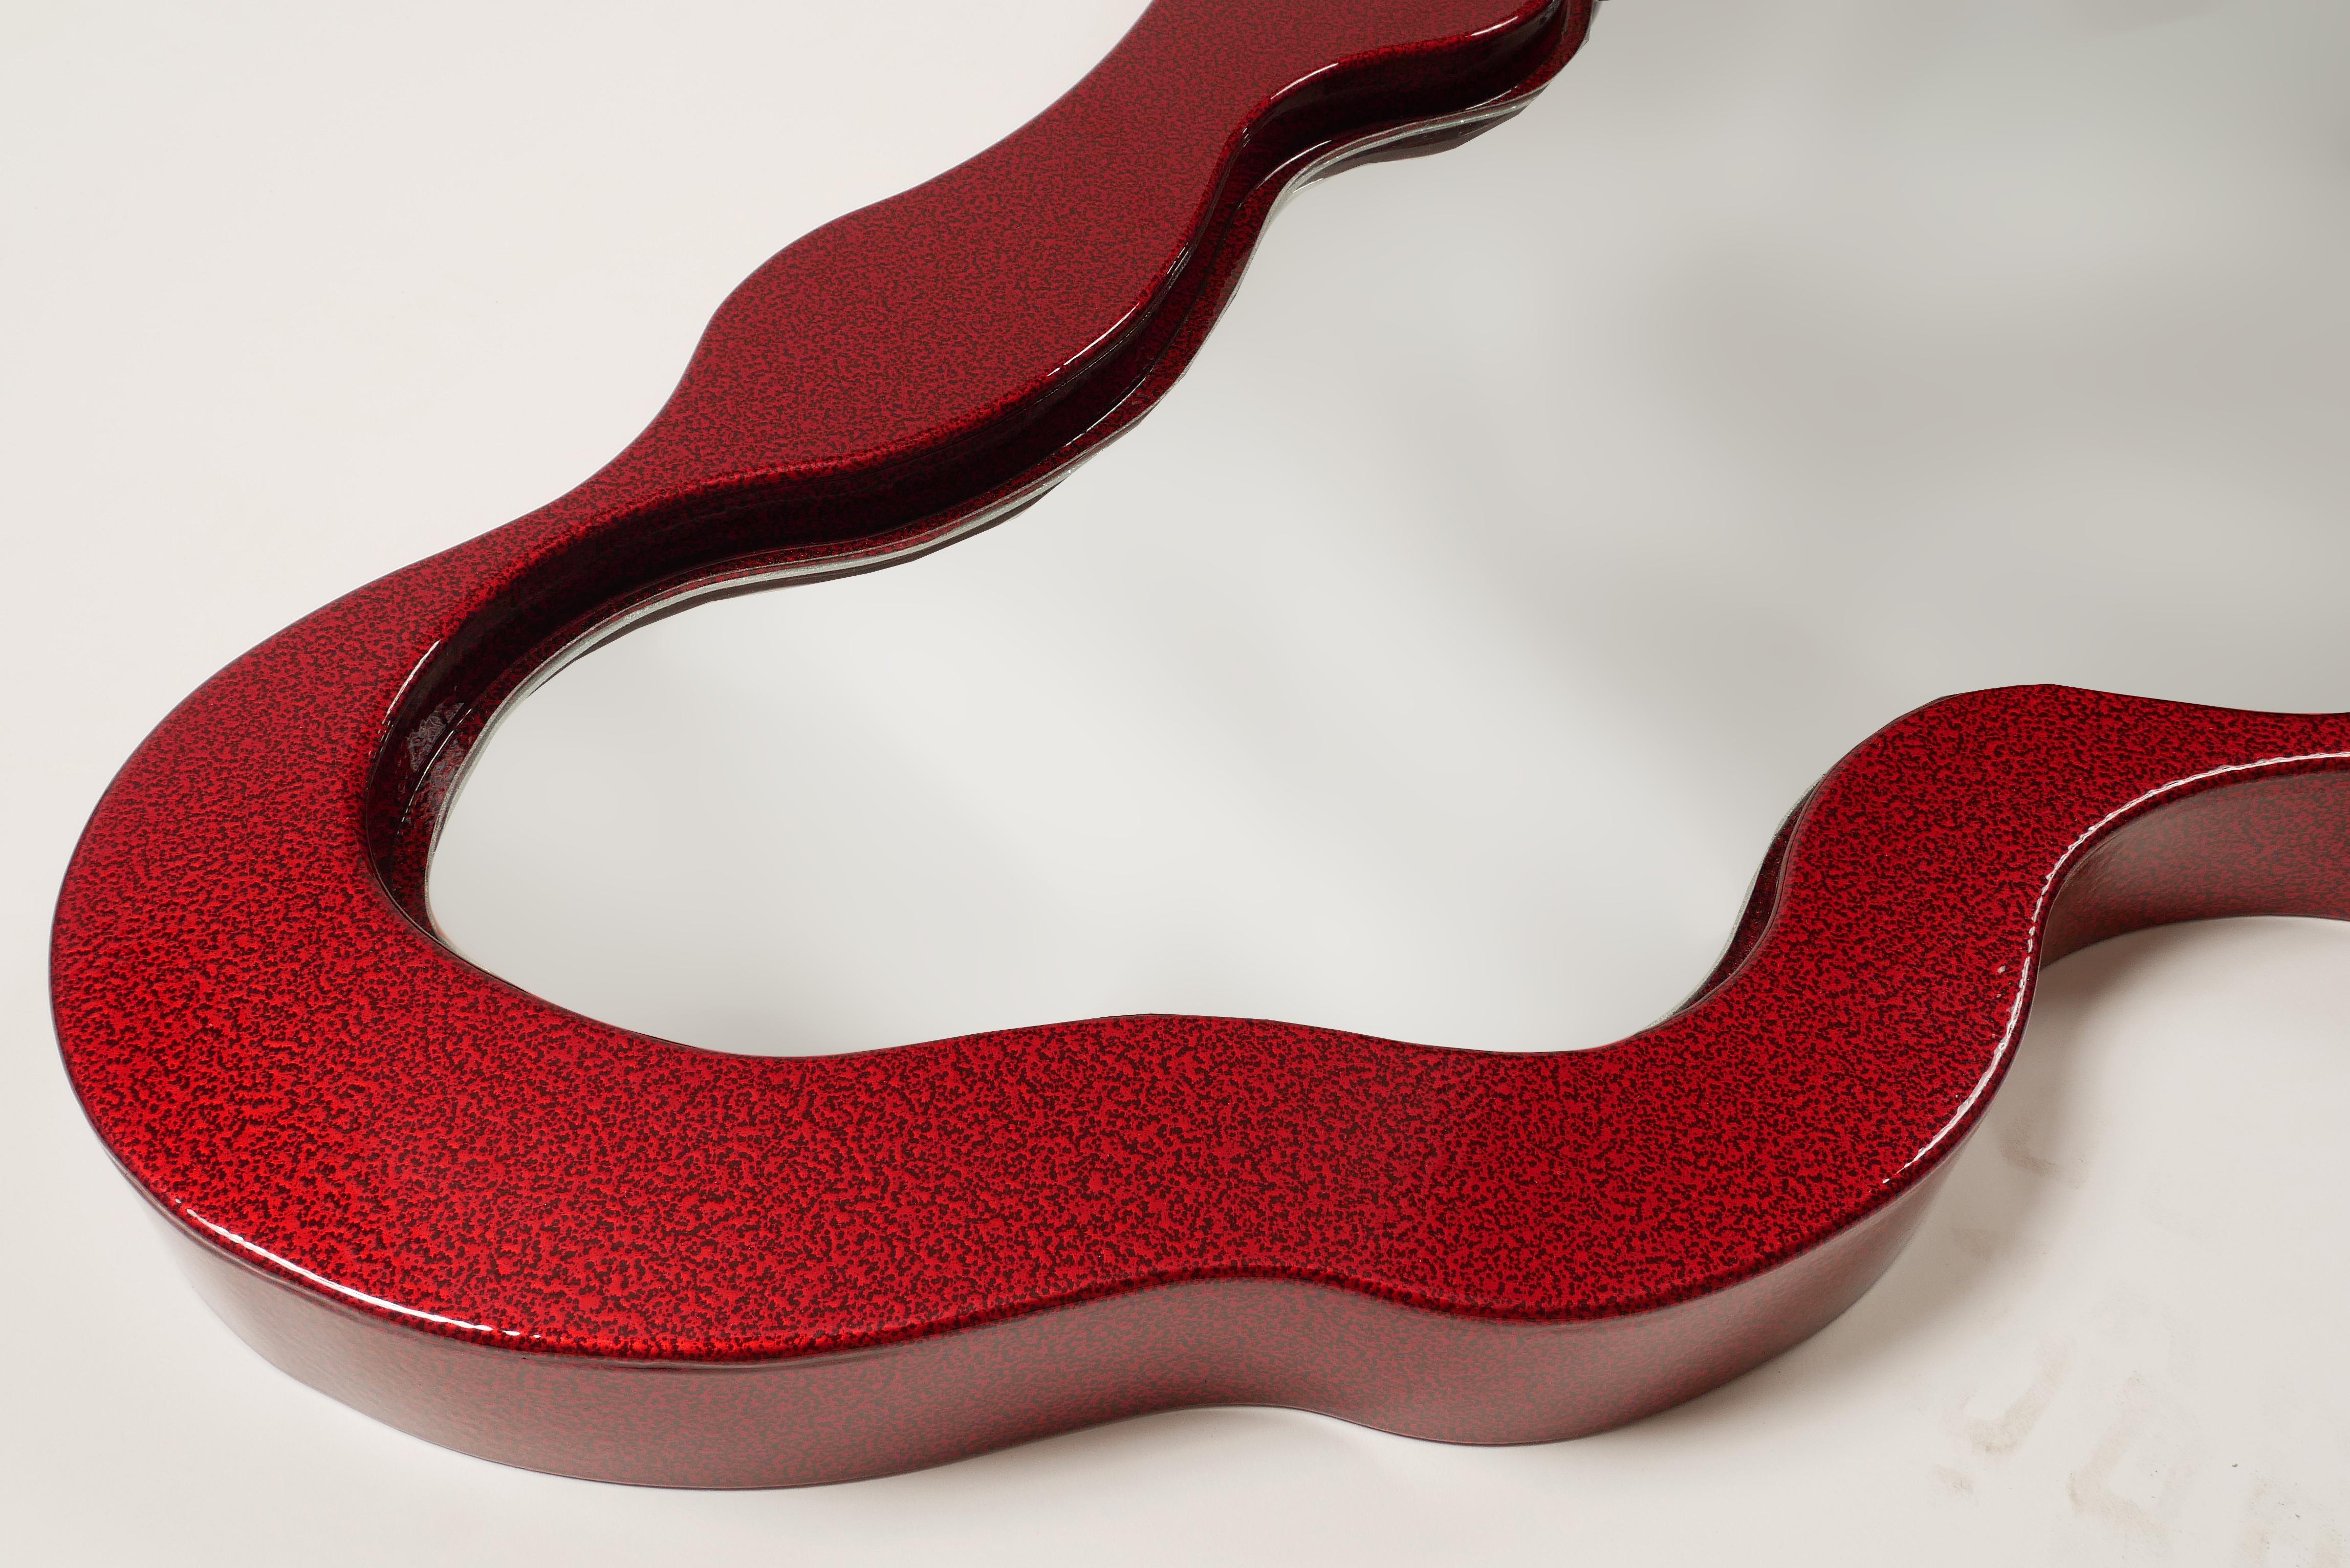 Bert Furnari abstract free-form aluminum mirror, powder coated crimson finish

Offered for sale is an original Bert Furnari powder-coated abstract Free-form aluminum mirror with a custom powder-coated crimson finish. The mirror is to be hung